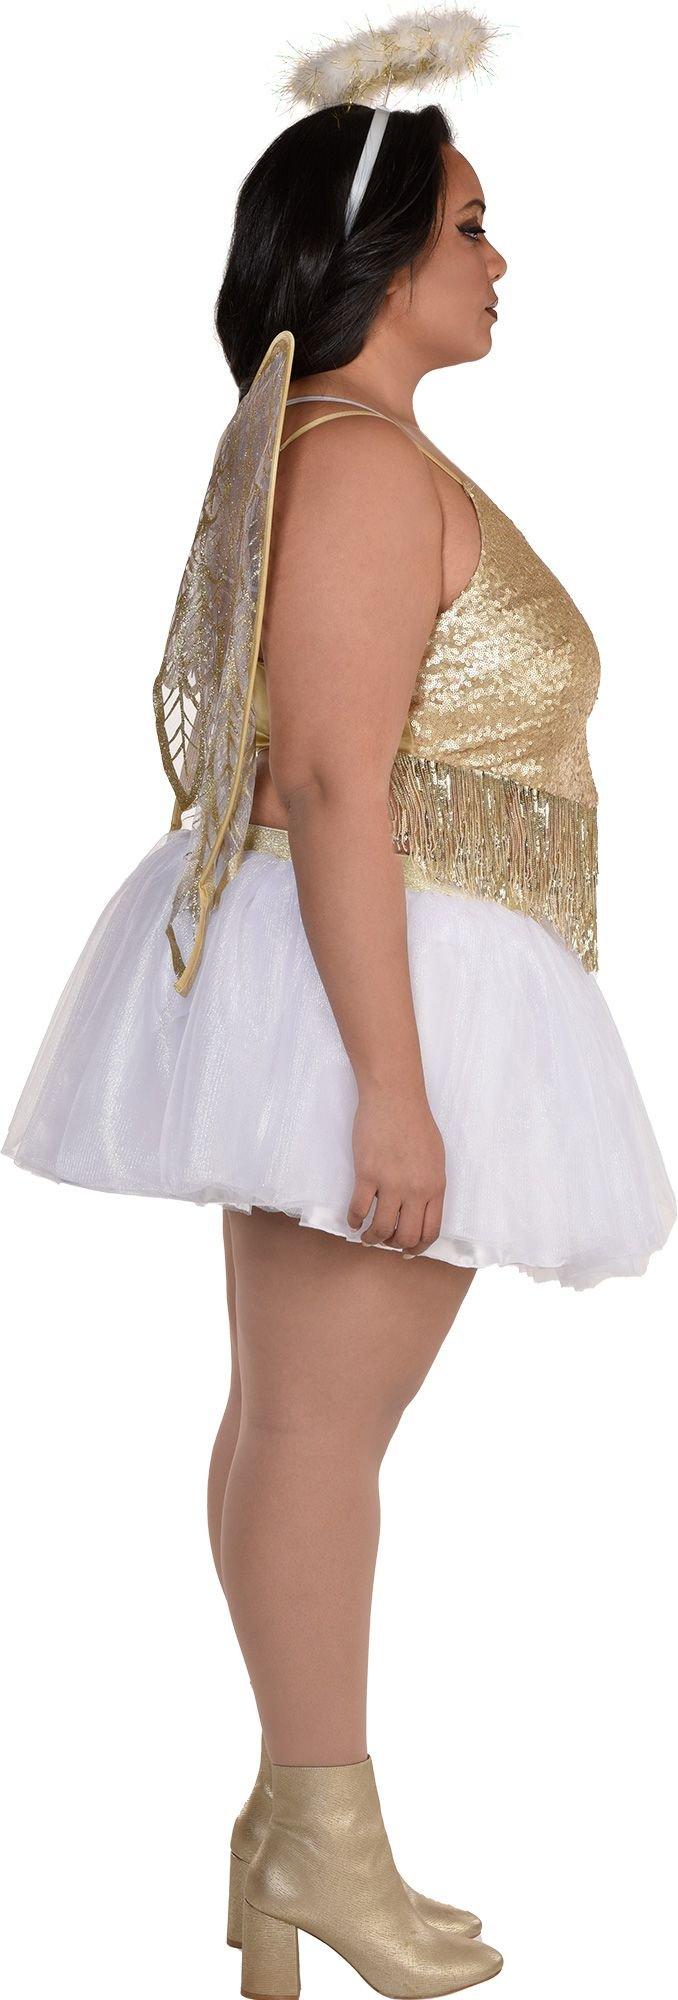 Adult Gilded Angel Costume - Plus Size